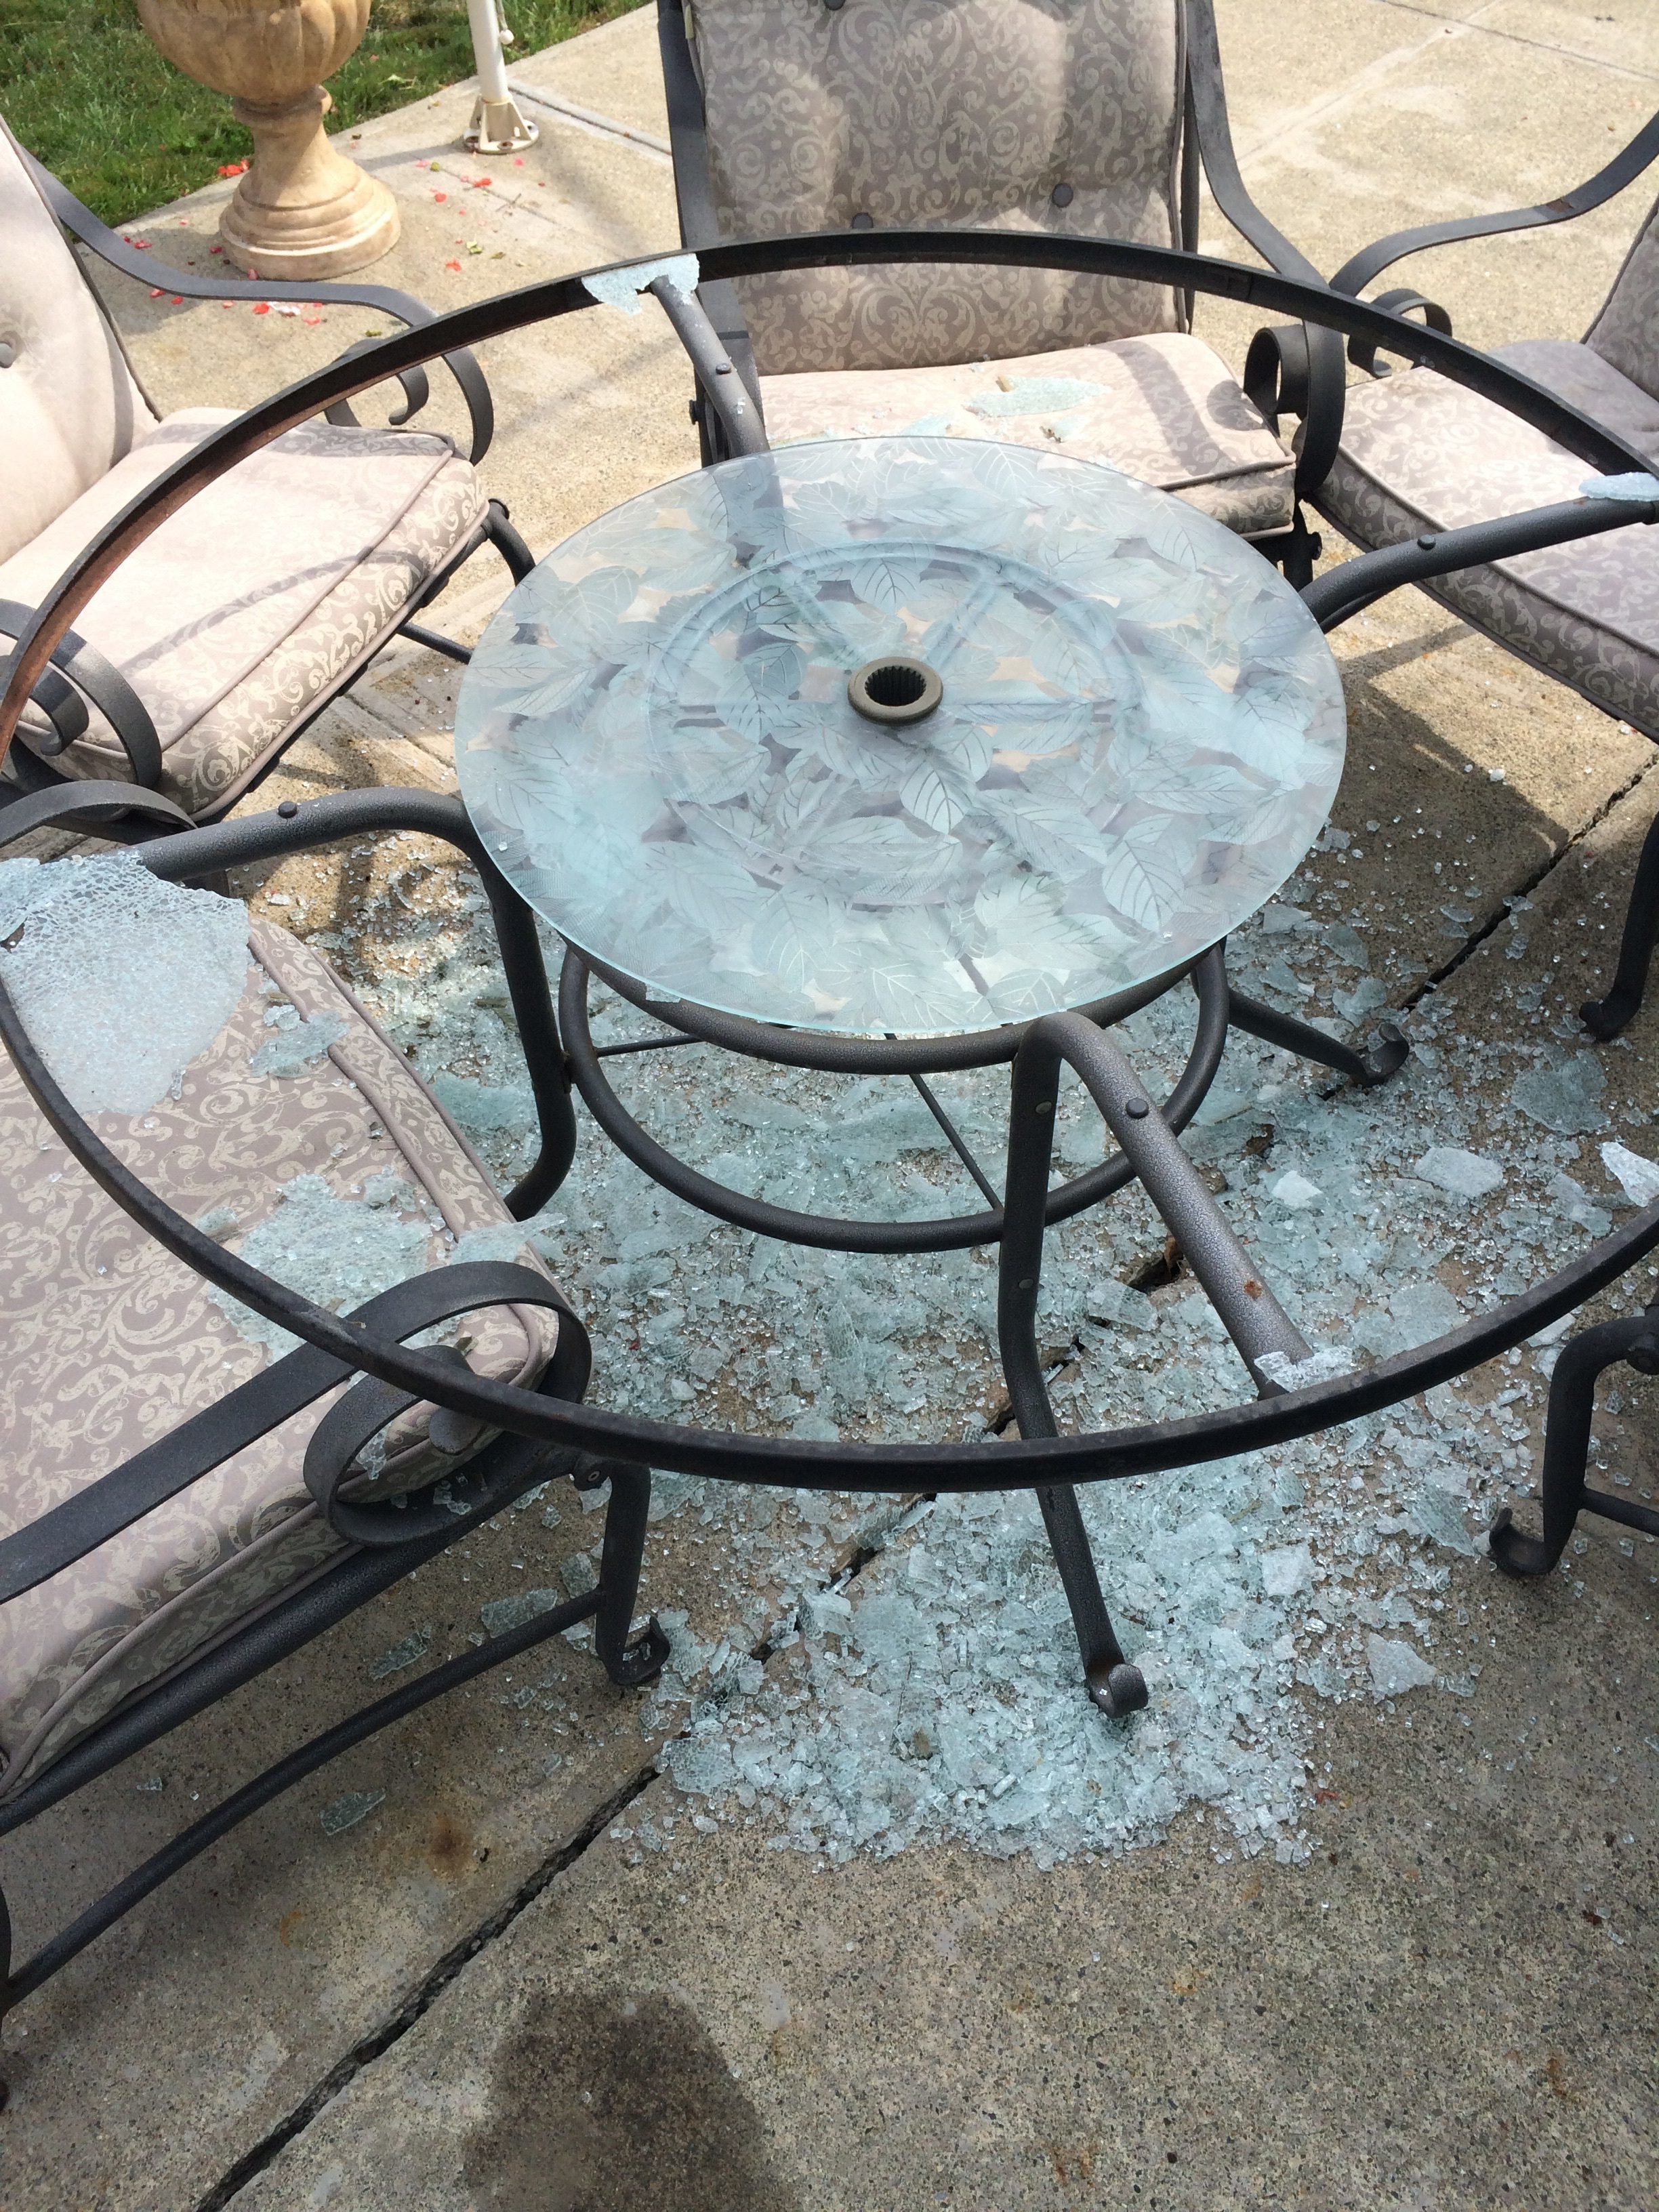 Top 1621 Reviews And Complaints About Martha Stewart Outdoor throughout Replacement Glass Table Top For Patio Furniture